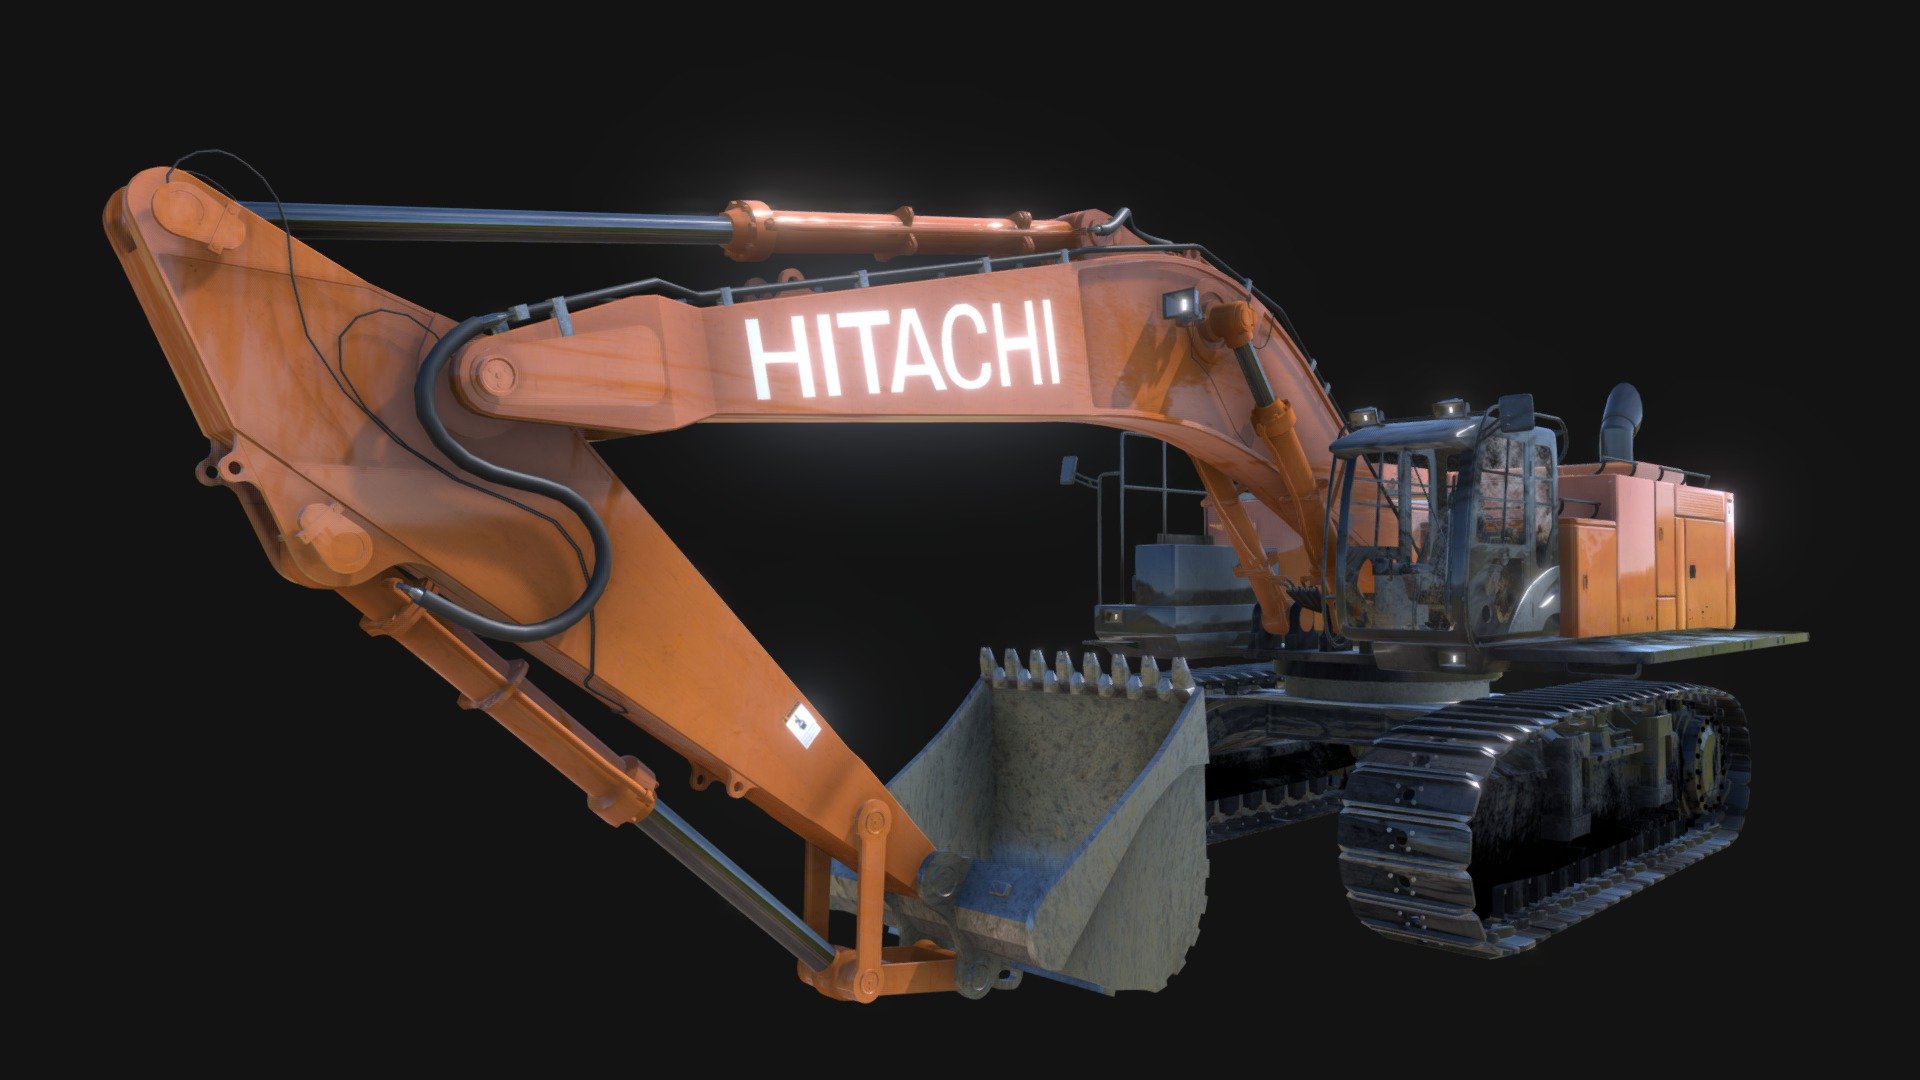 An Hitachi ZX870LC I modeled. It took 47 hours to build 3d model